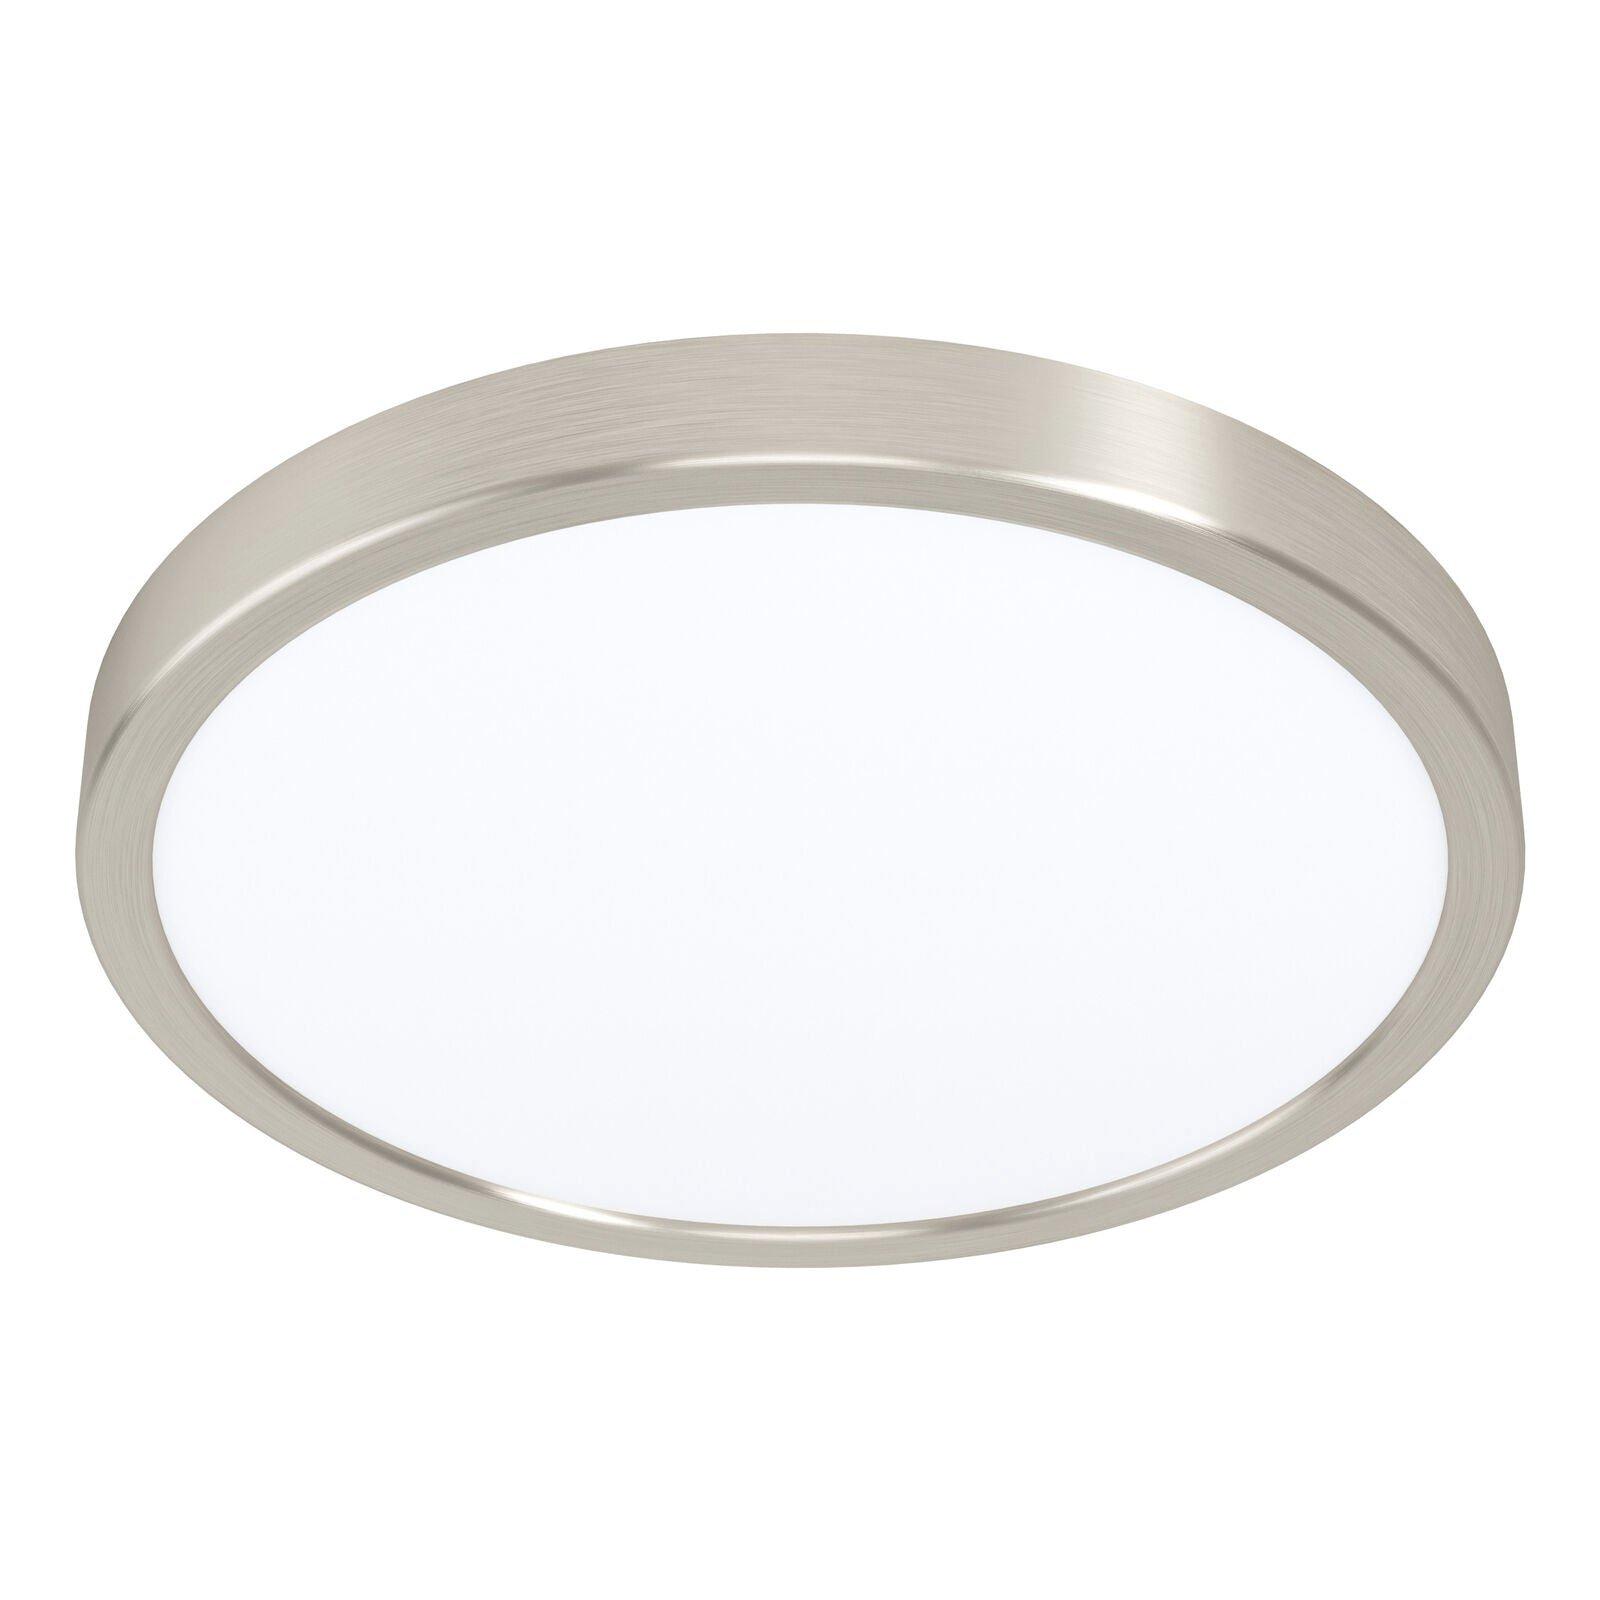 Wall / Ceiling Light Satin Nickel 285mm Round Surface Mounted 20W LED 3000K